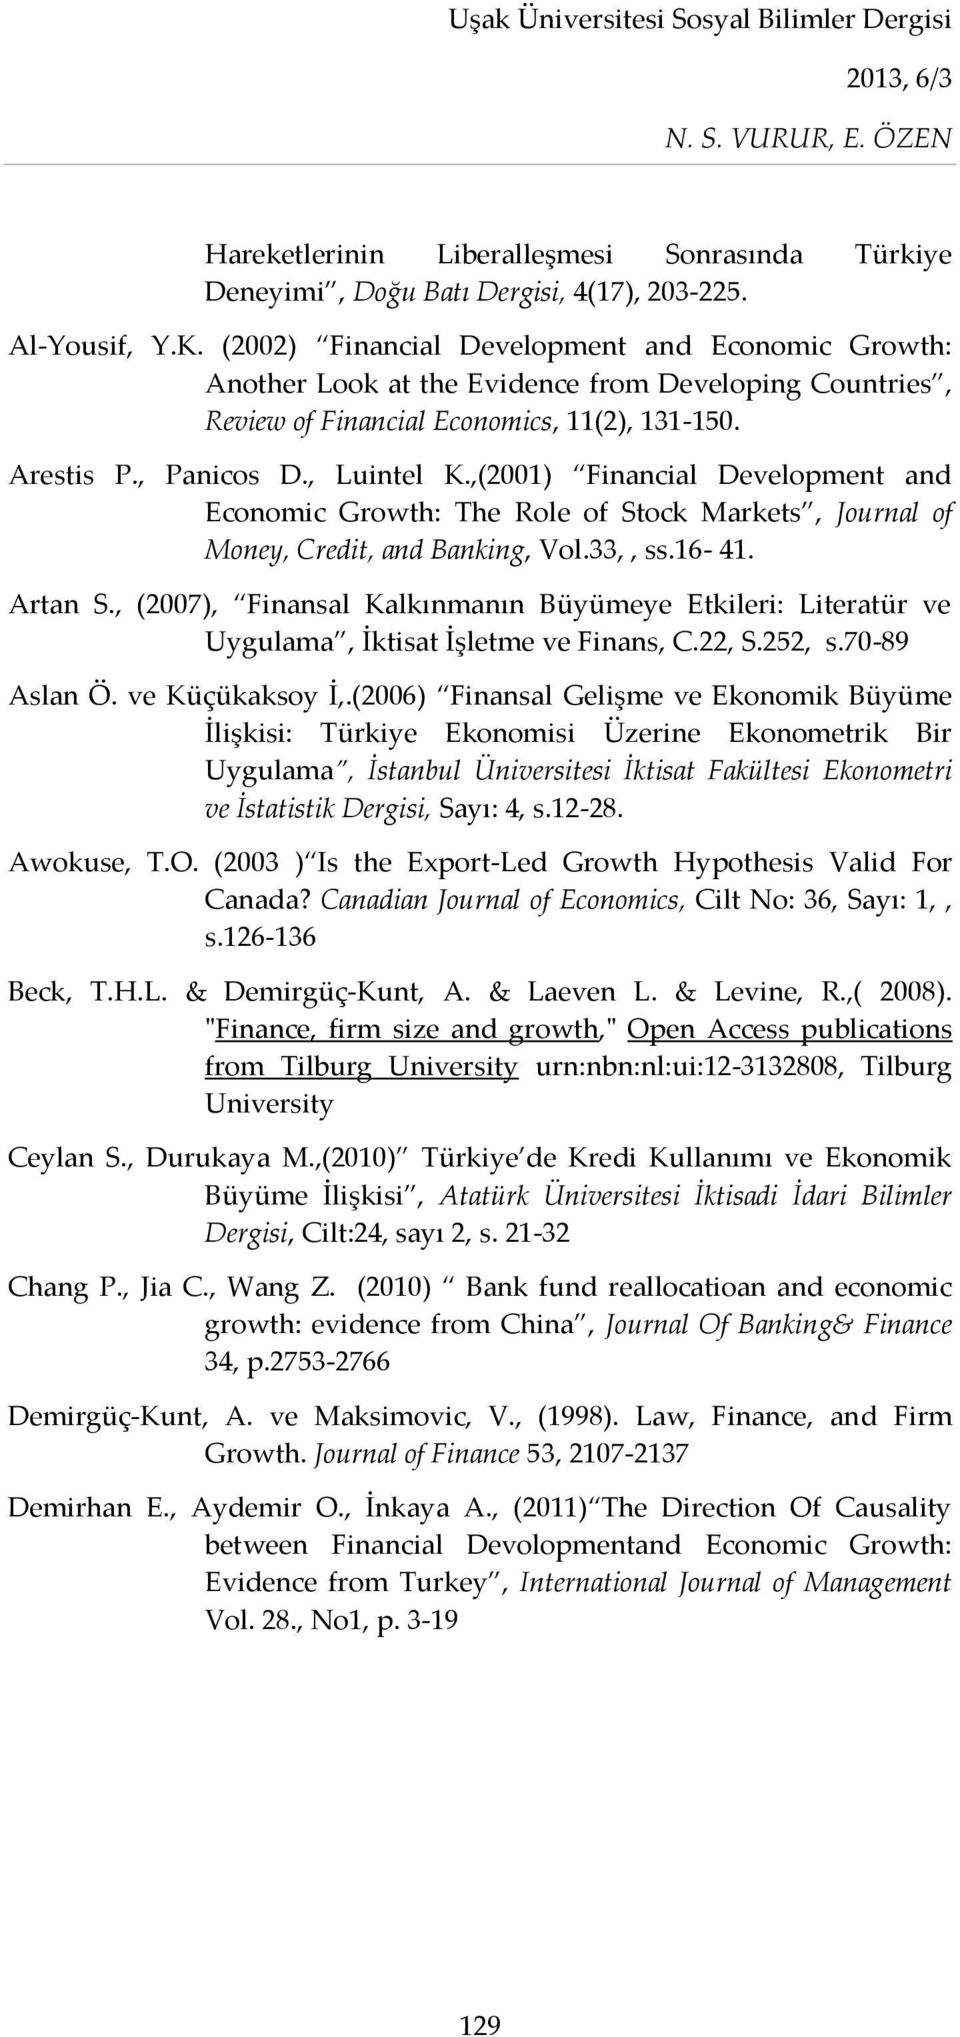 ,(2001) Financial Development and Economic Growth: The Role of Stock Markets, Journal of Money, Credit, and Banking, Vol.33,, ss.16-41. Artan S.